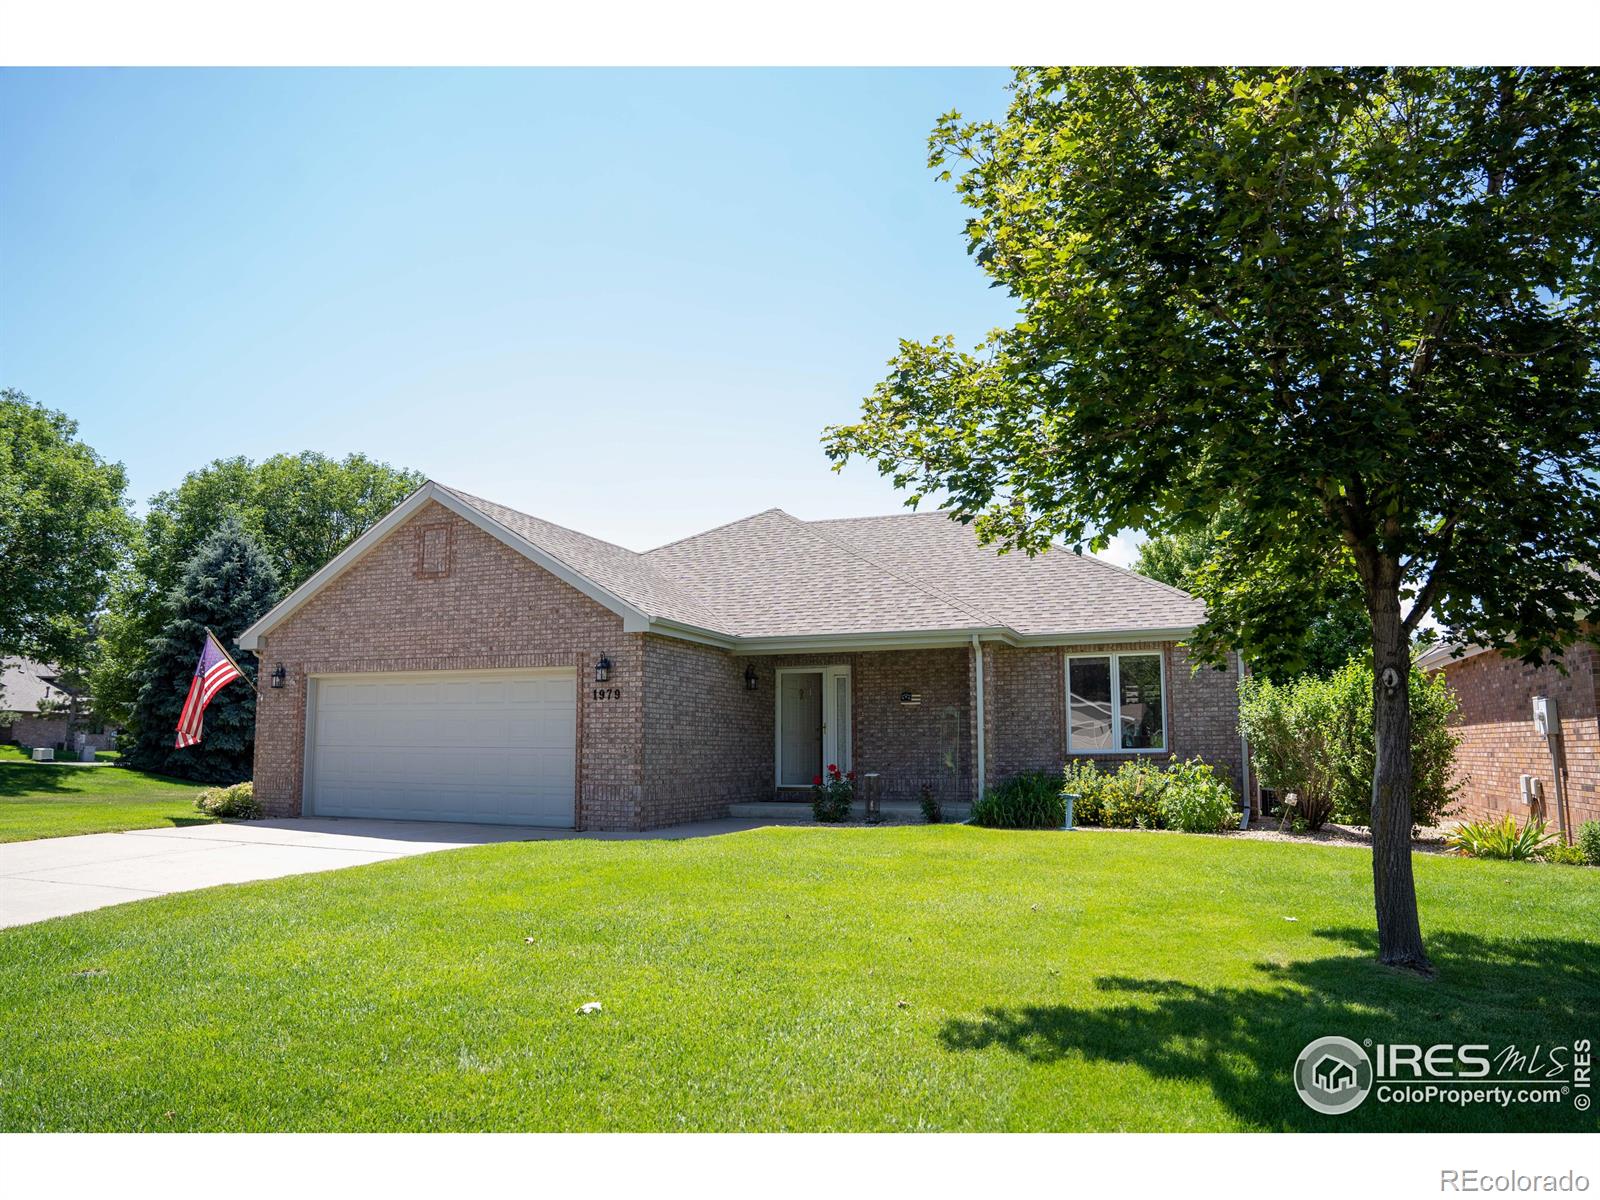 1979  44th Ave Ct, greeley MLS: 456789999178 Beds: 4 Baths: 3 Price: $450,000